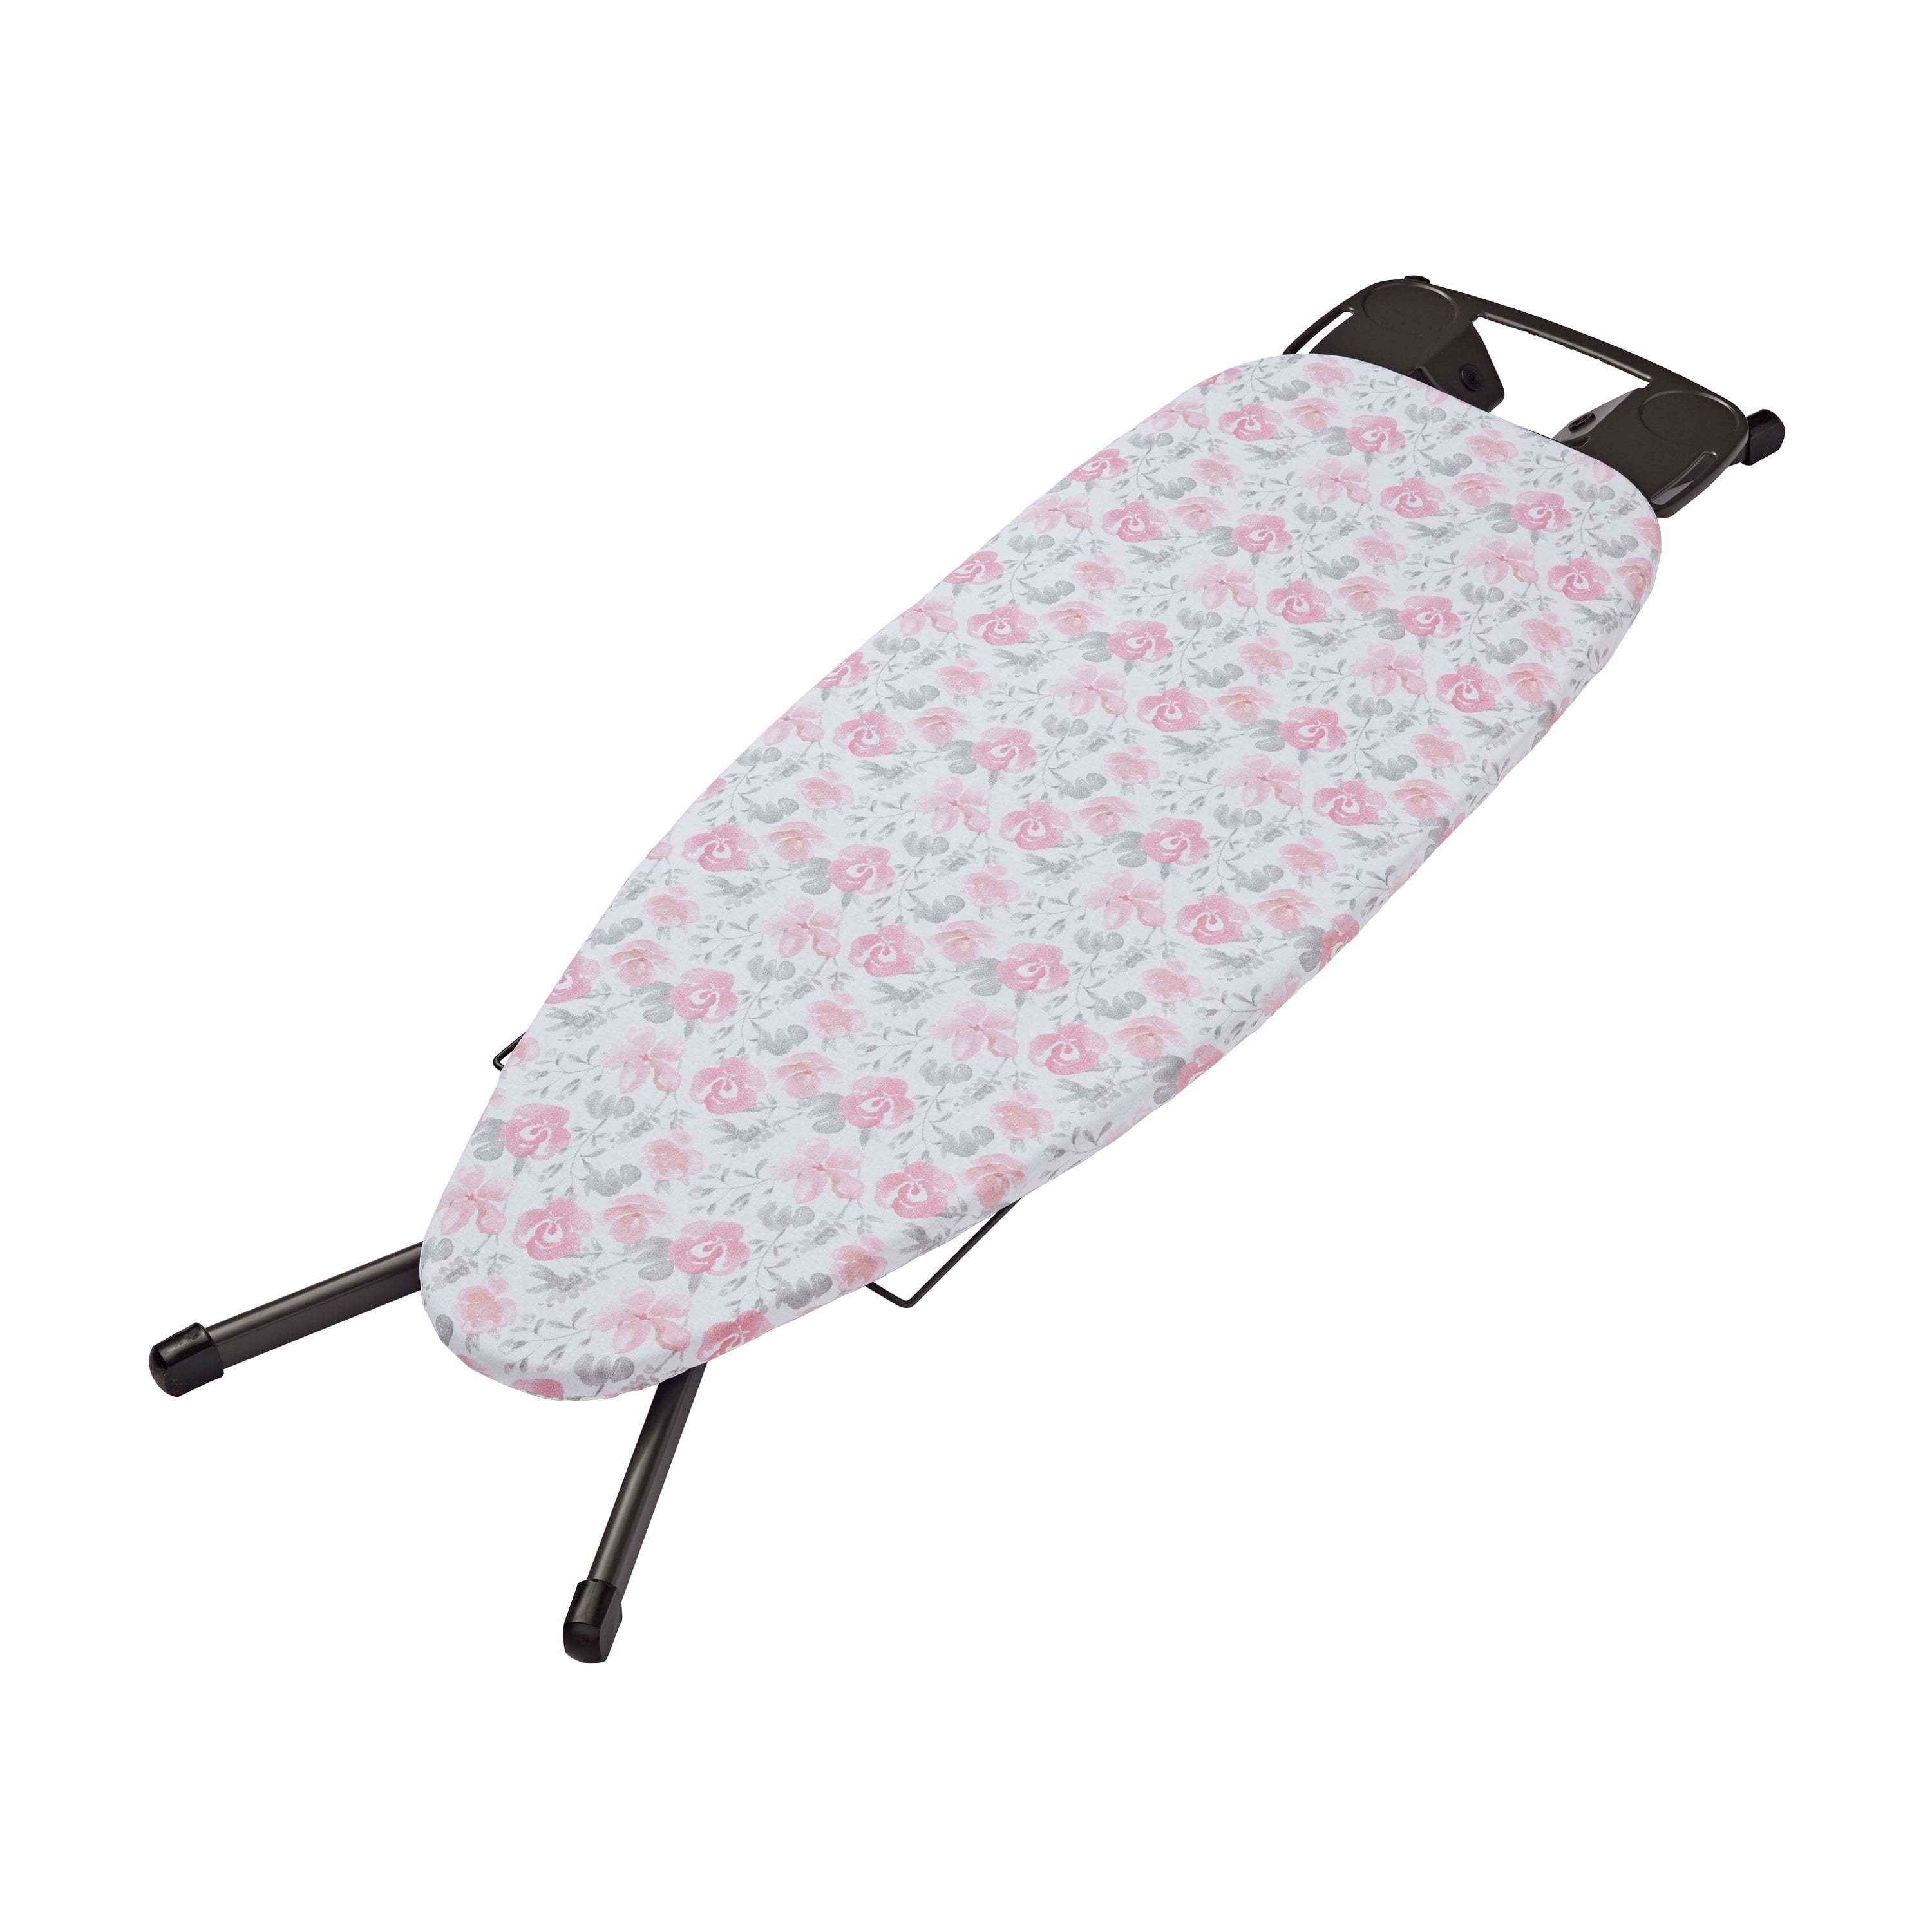 Farmhouse Ironing Board Cover